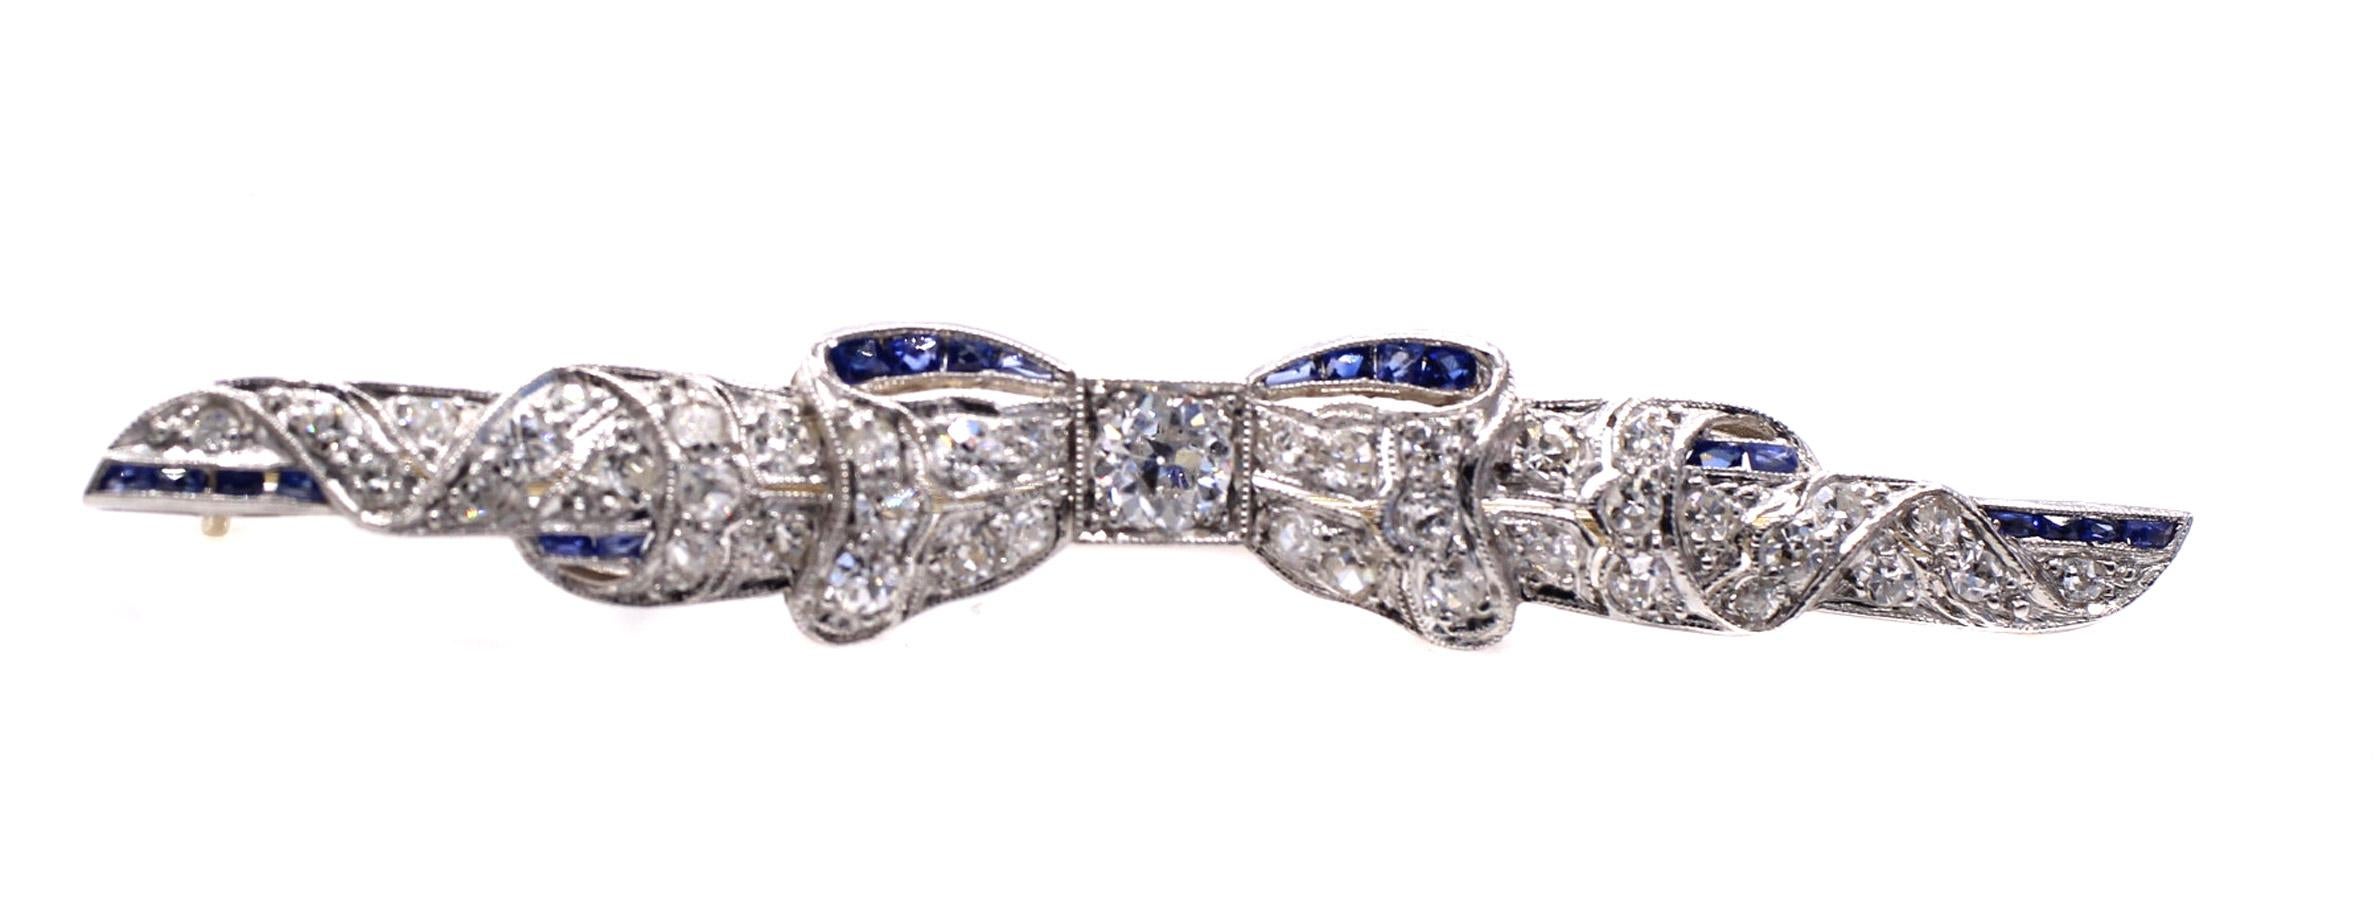 Beautifully designed and masterfully handcrafted in platinum, set with bright white and lively Old European cut diamonds and embellished with deep blue calibre sapphires.